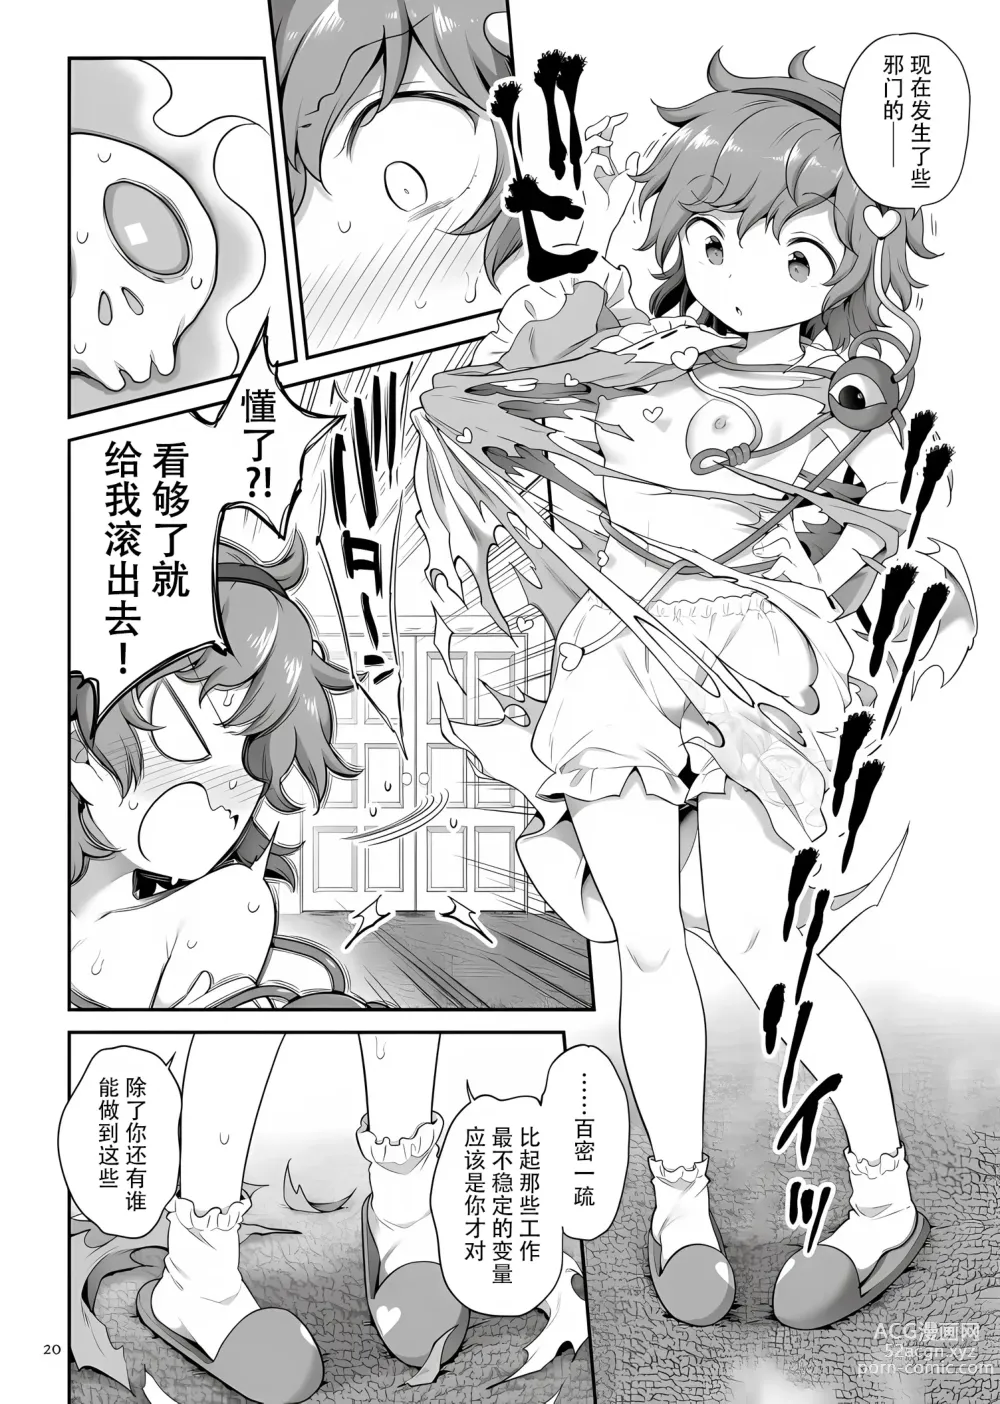 Page 20 of doujinshi [Unmei no Ikasumi (Harusame) Super Id (Touhou Project) [Chinese] [79%汉化组] [Digital]